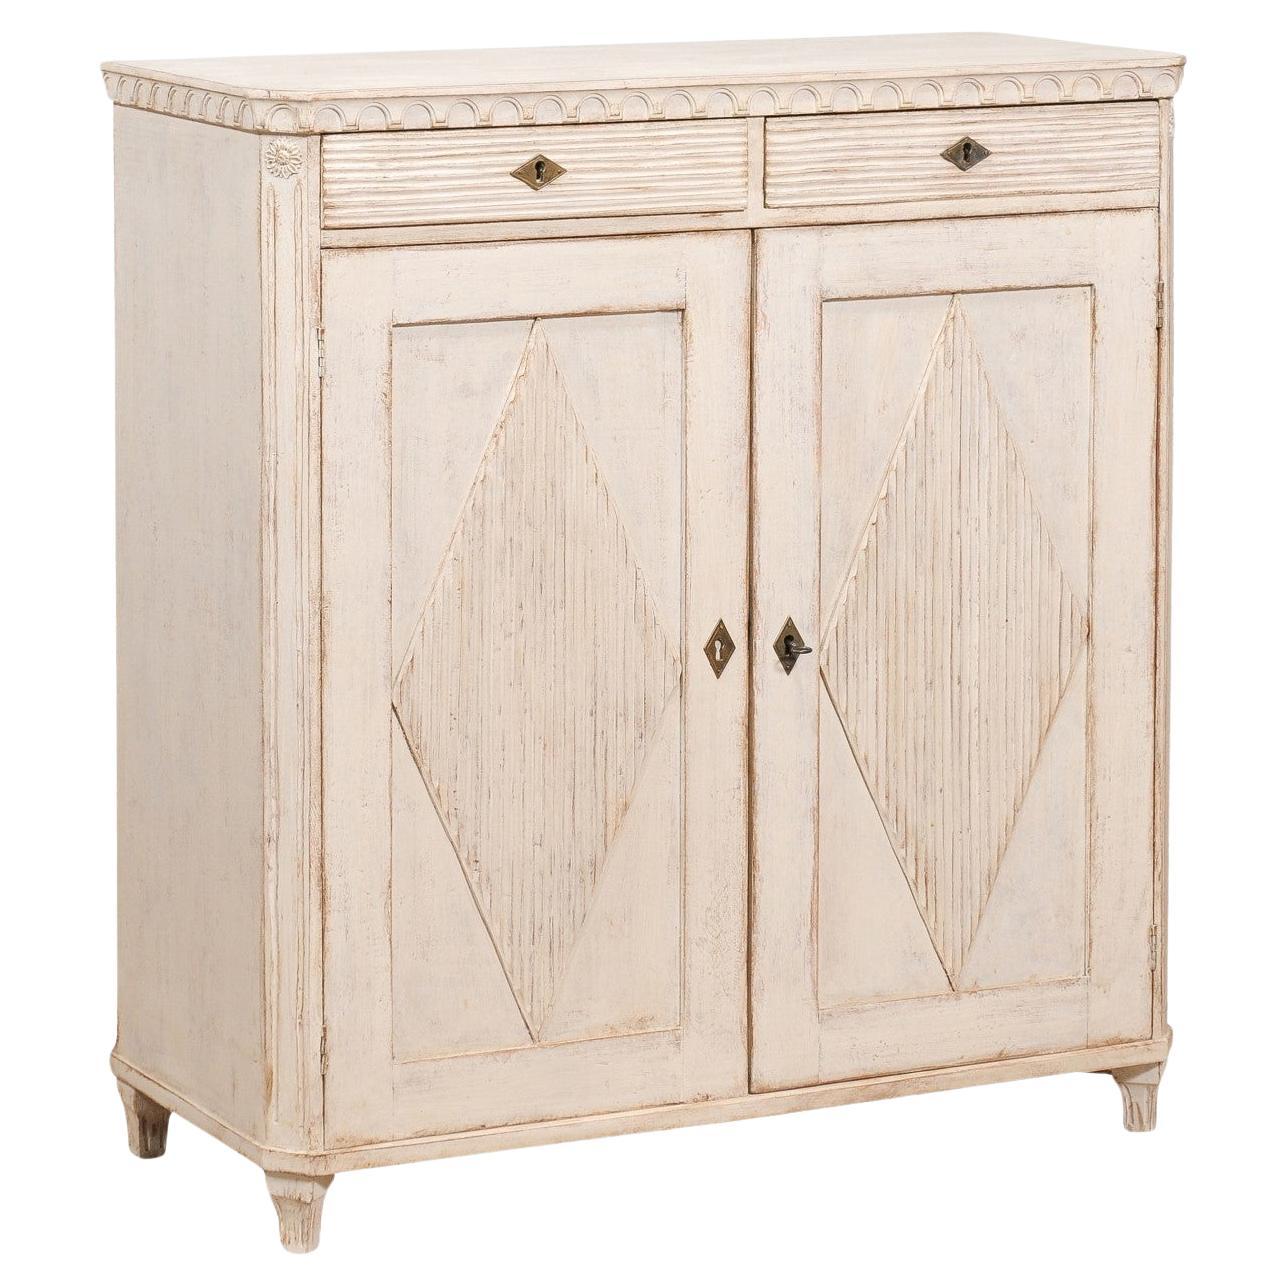 Swedish 19th Century Gustavian Style Painted and Carved Sideboard Diamond Motifs